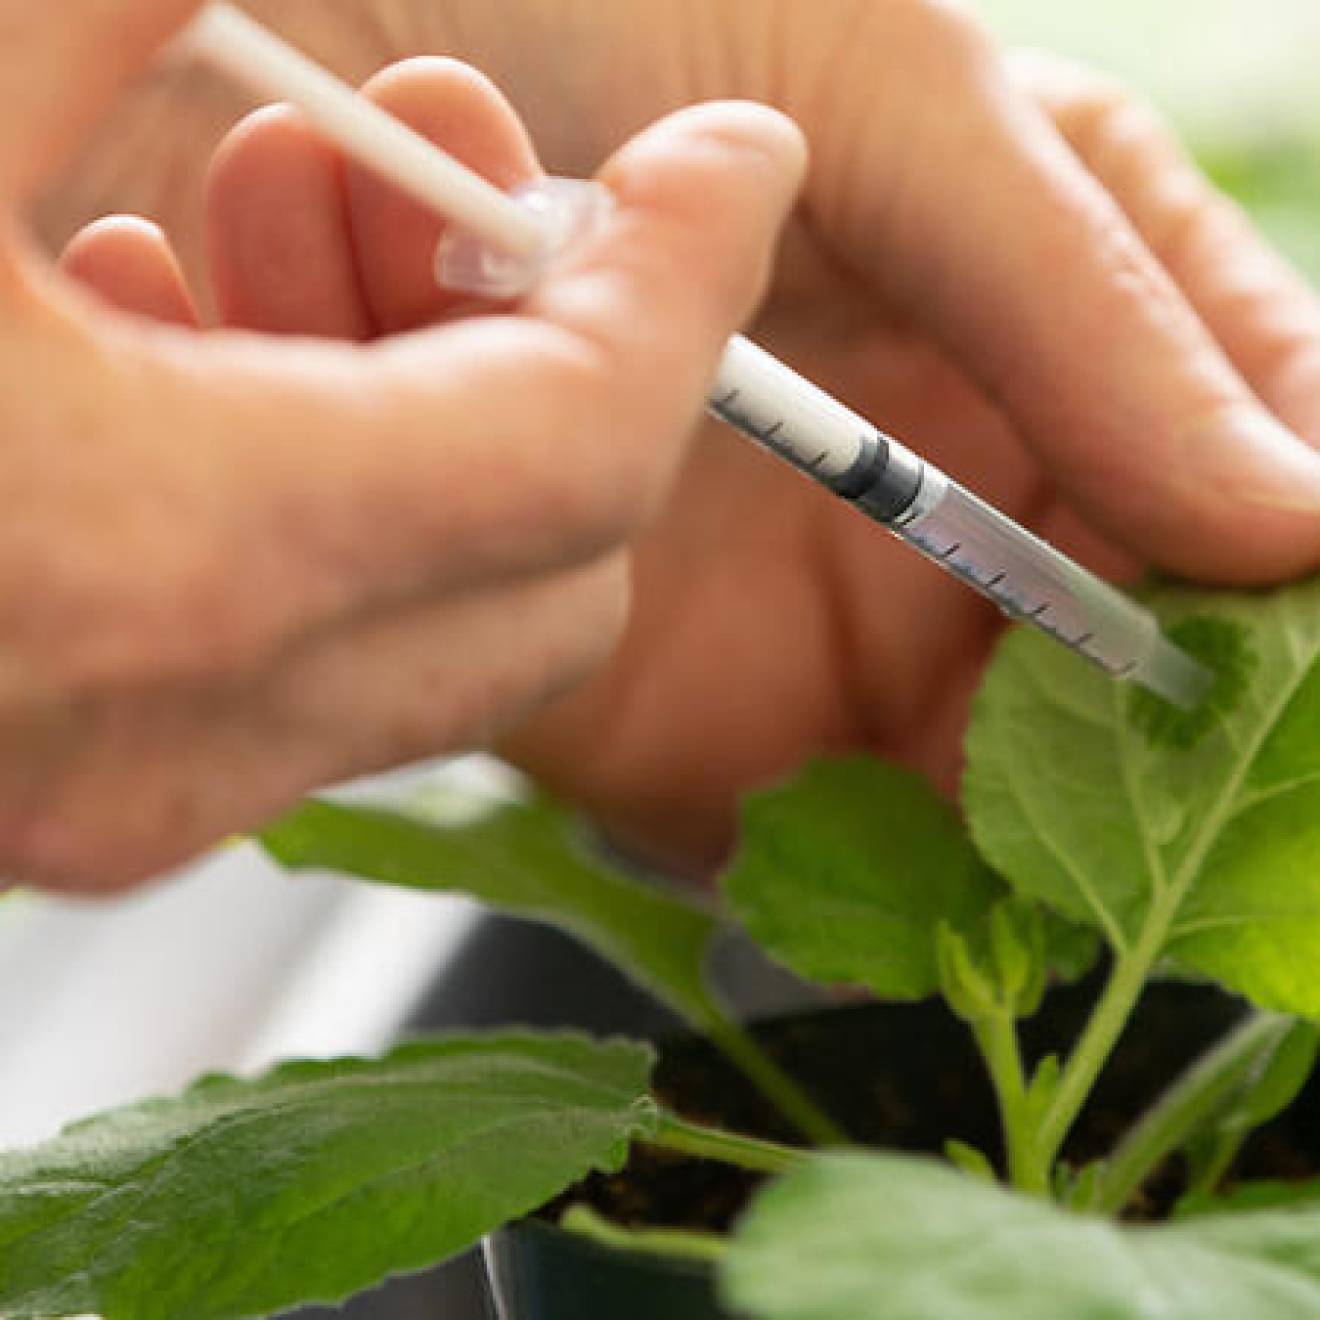 Hands injecting something into a plant leaf